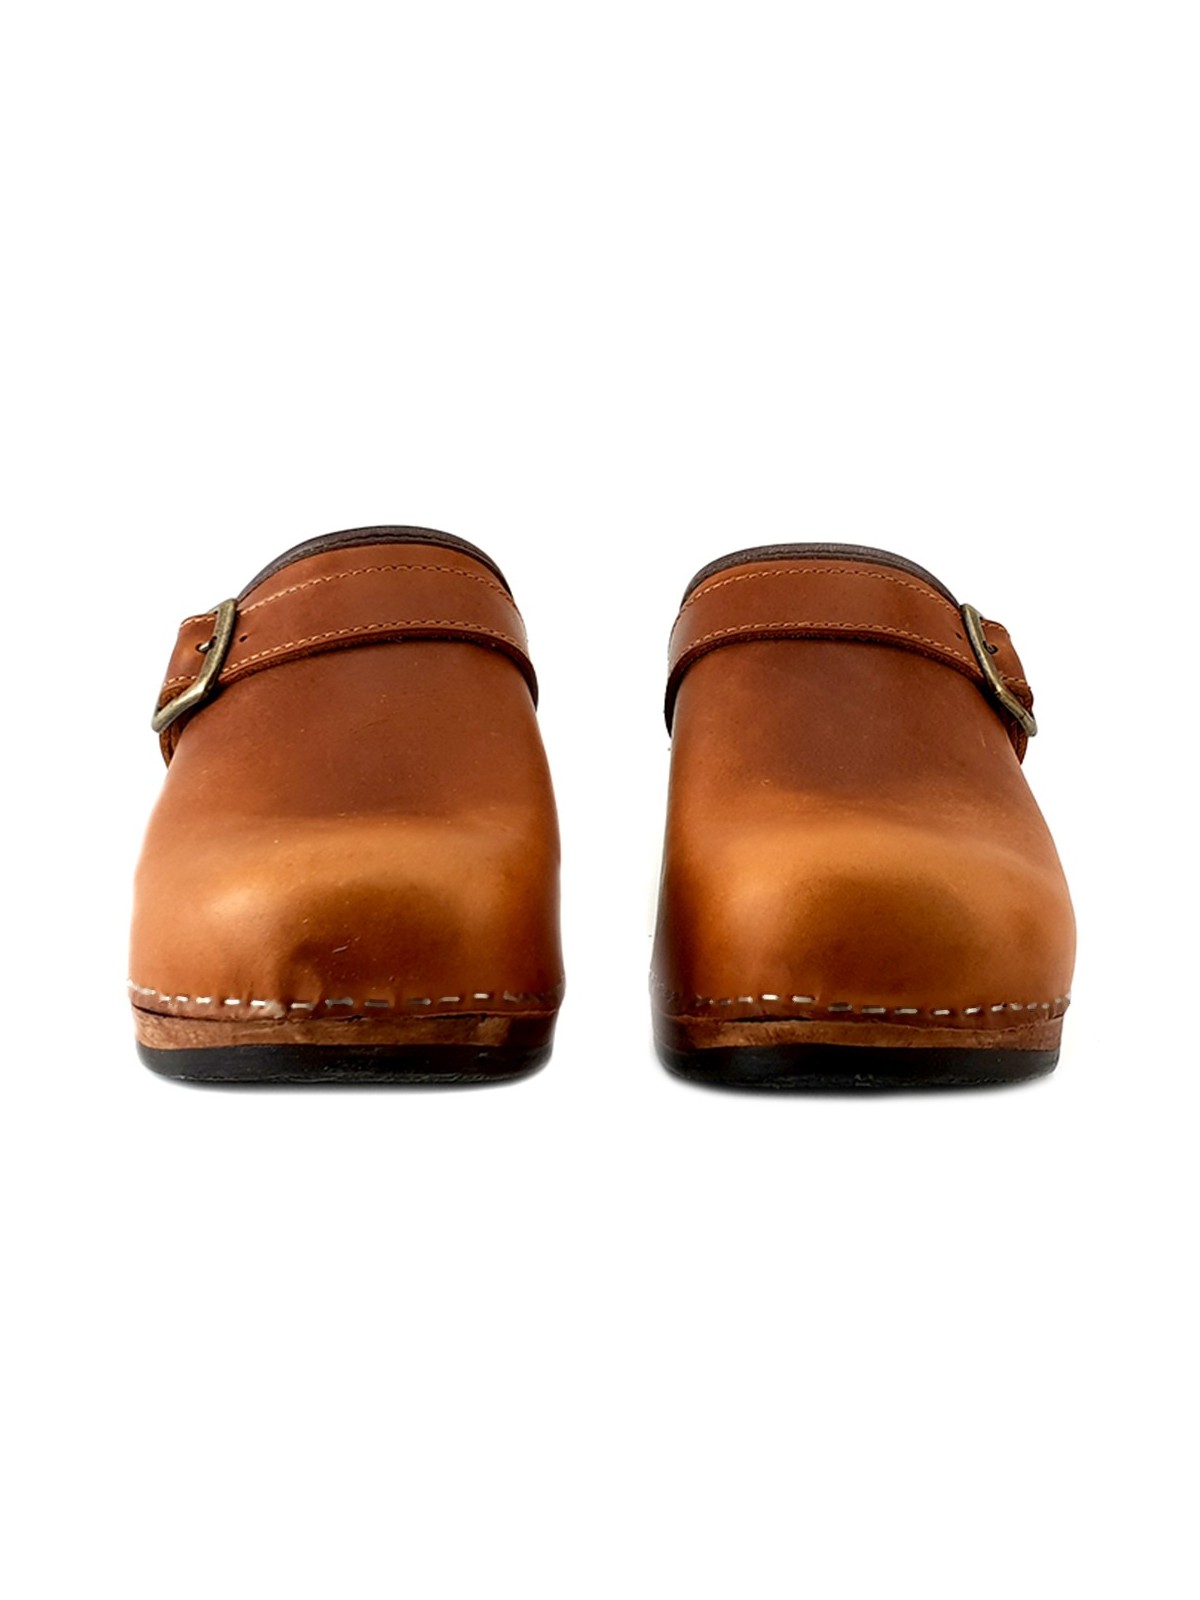 BROWN LEATHER CLOGS OPEN